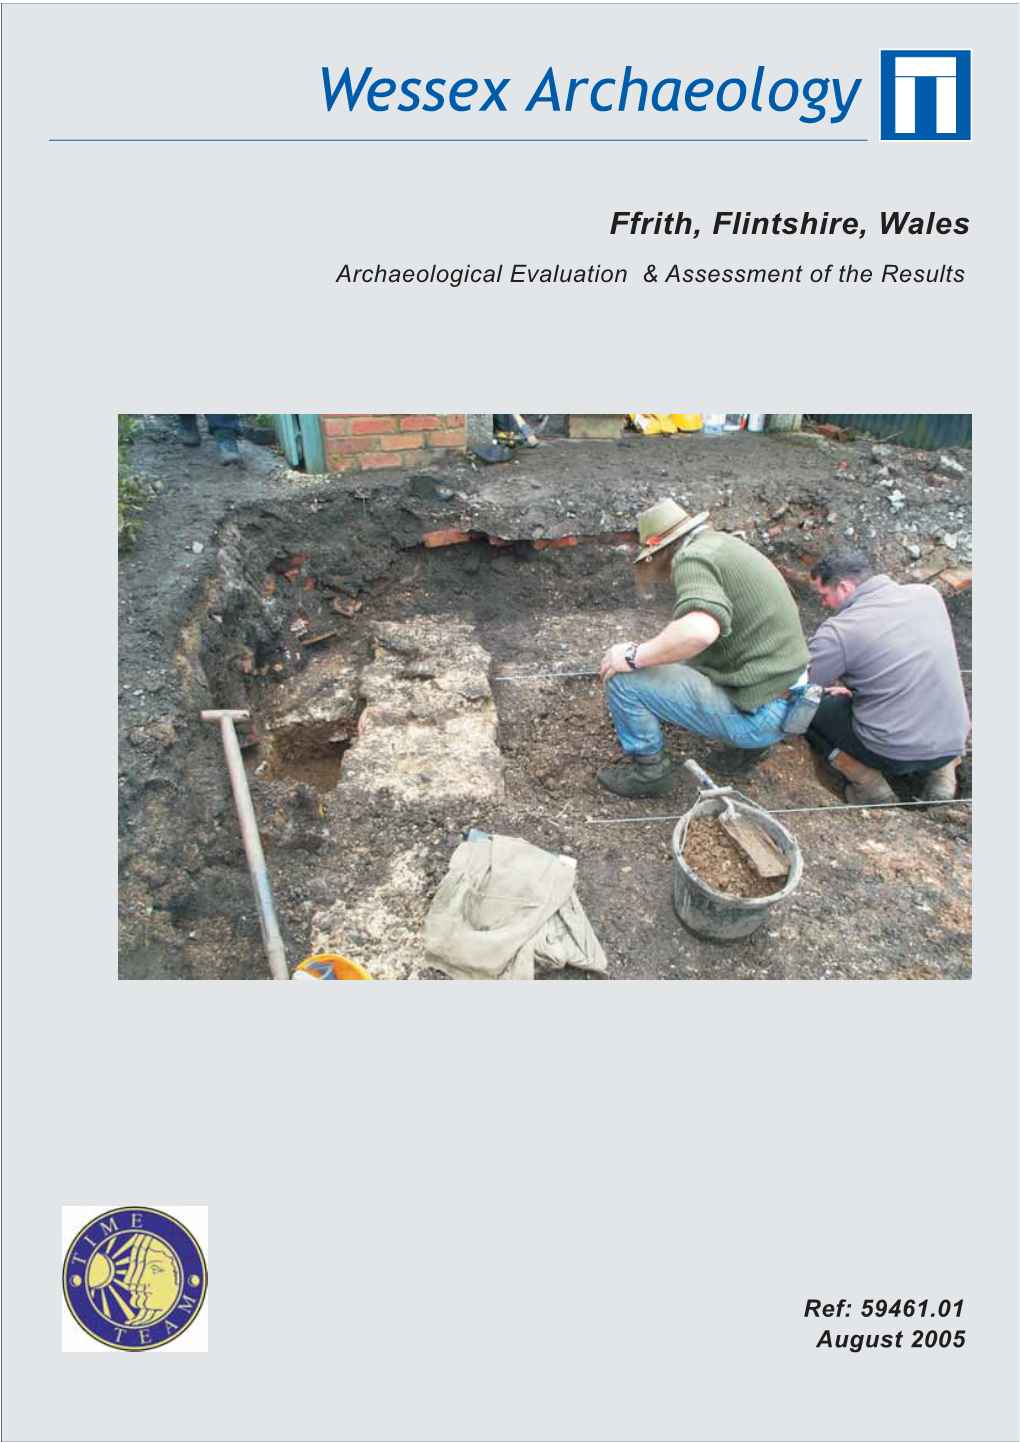 Ffrith, Flintshire, Wales Archaeological Evaluation & Assessment of the Results